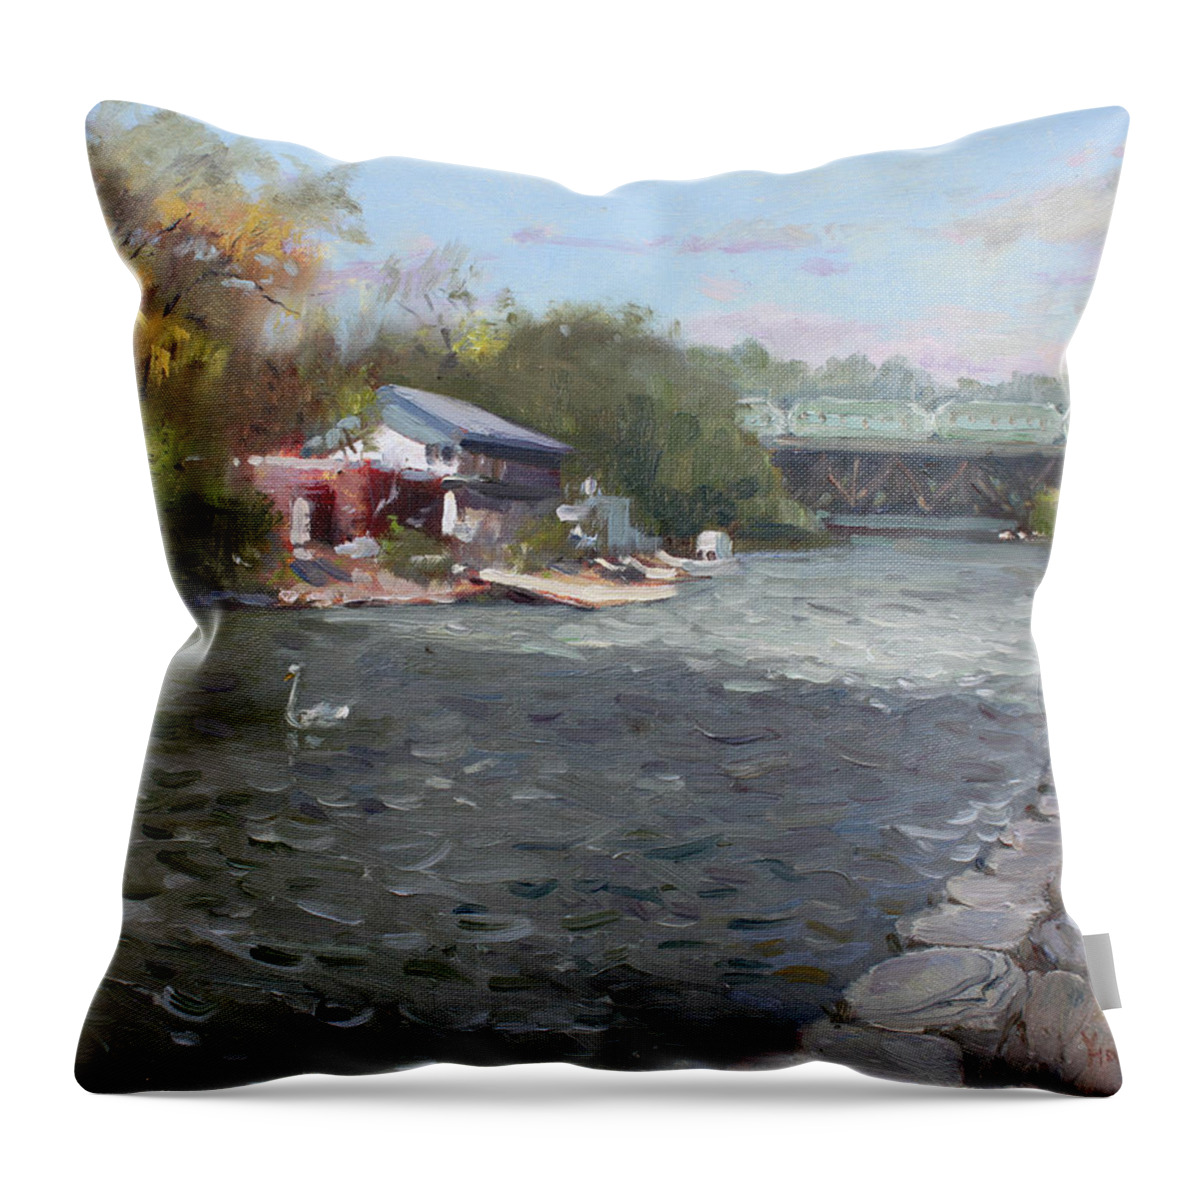 Mississauga Throw Pillow featuring the painting Mississauga Canoe Club by Ylli Haruni